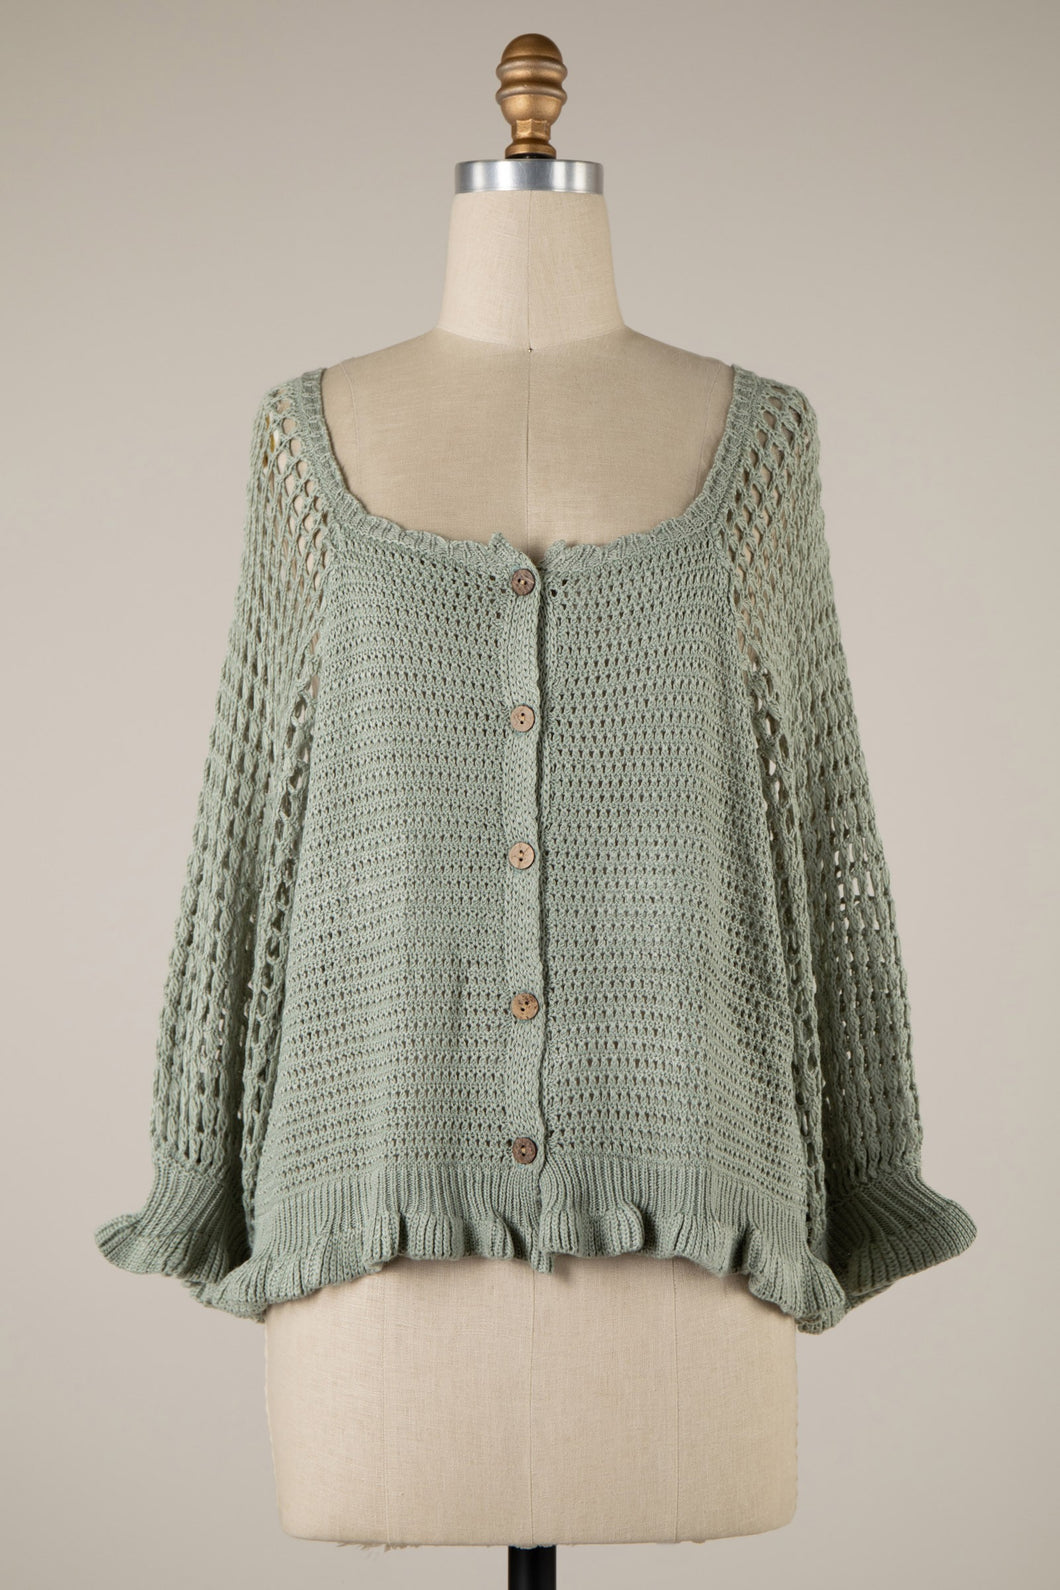 Miracle Crochet Button Down Lightweight Sweater Top in Sage  Miracle   